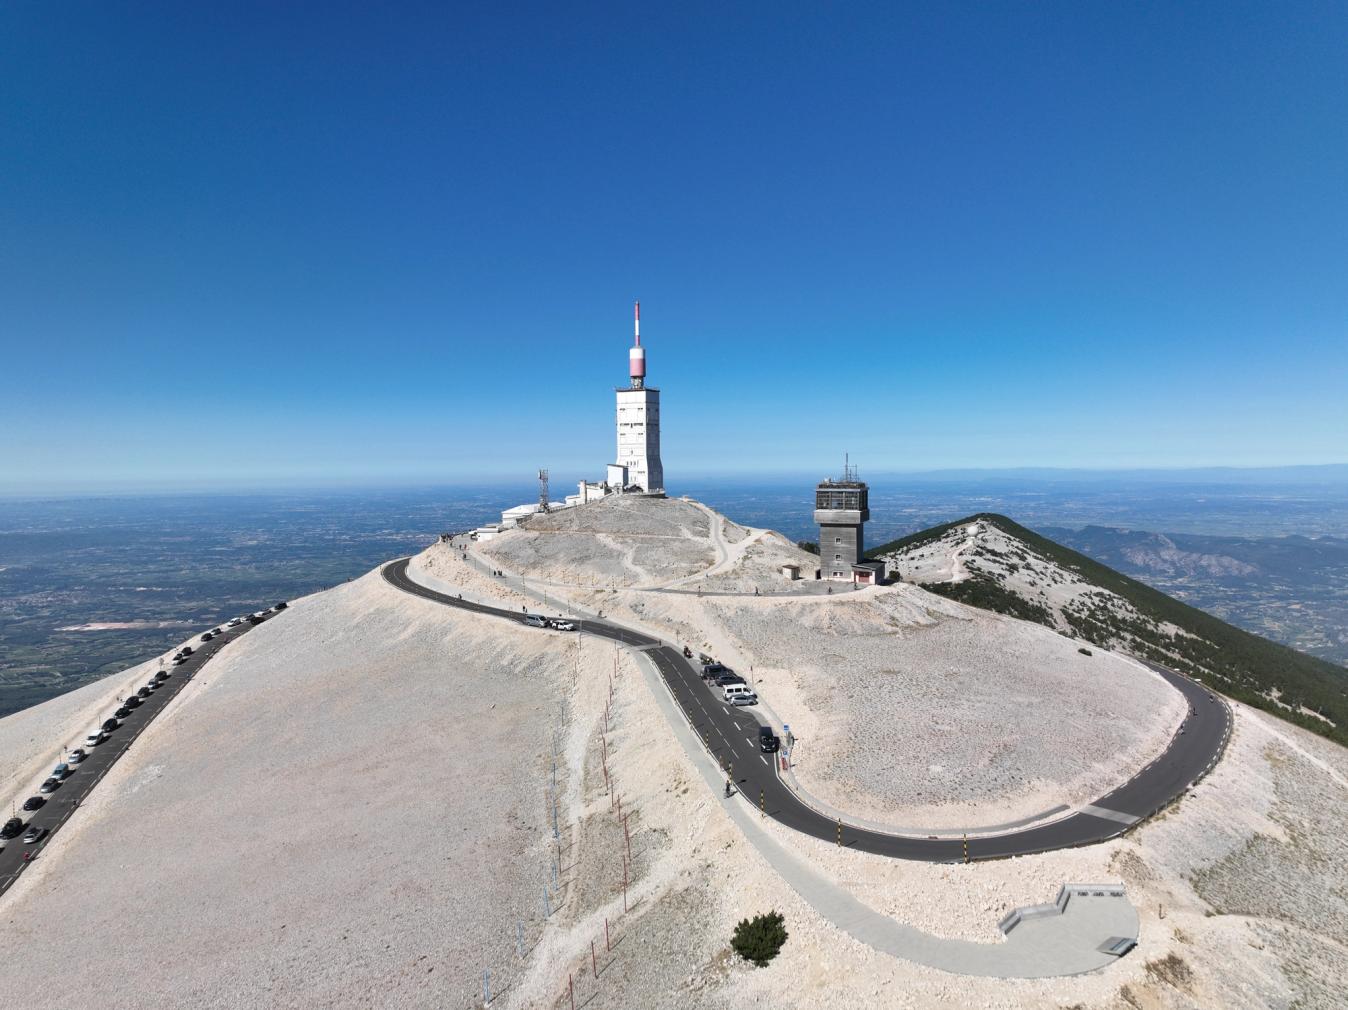 The summit of Ventoux in all its glory